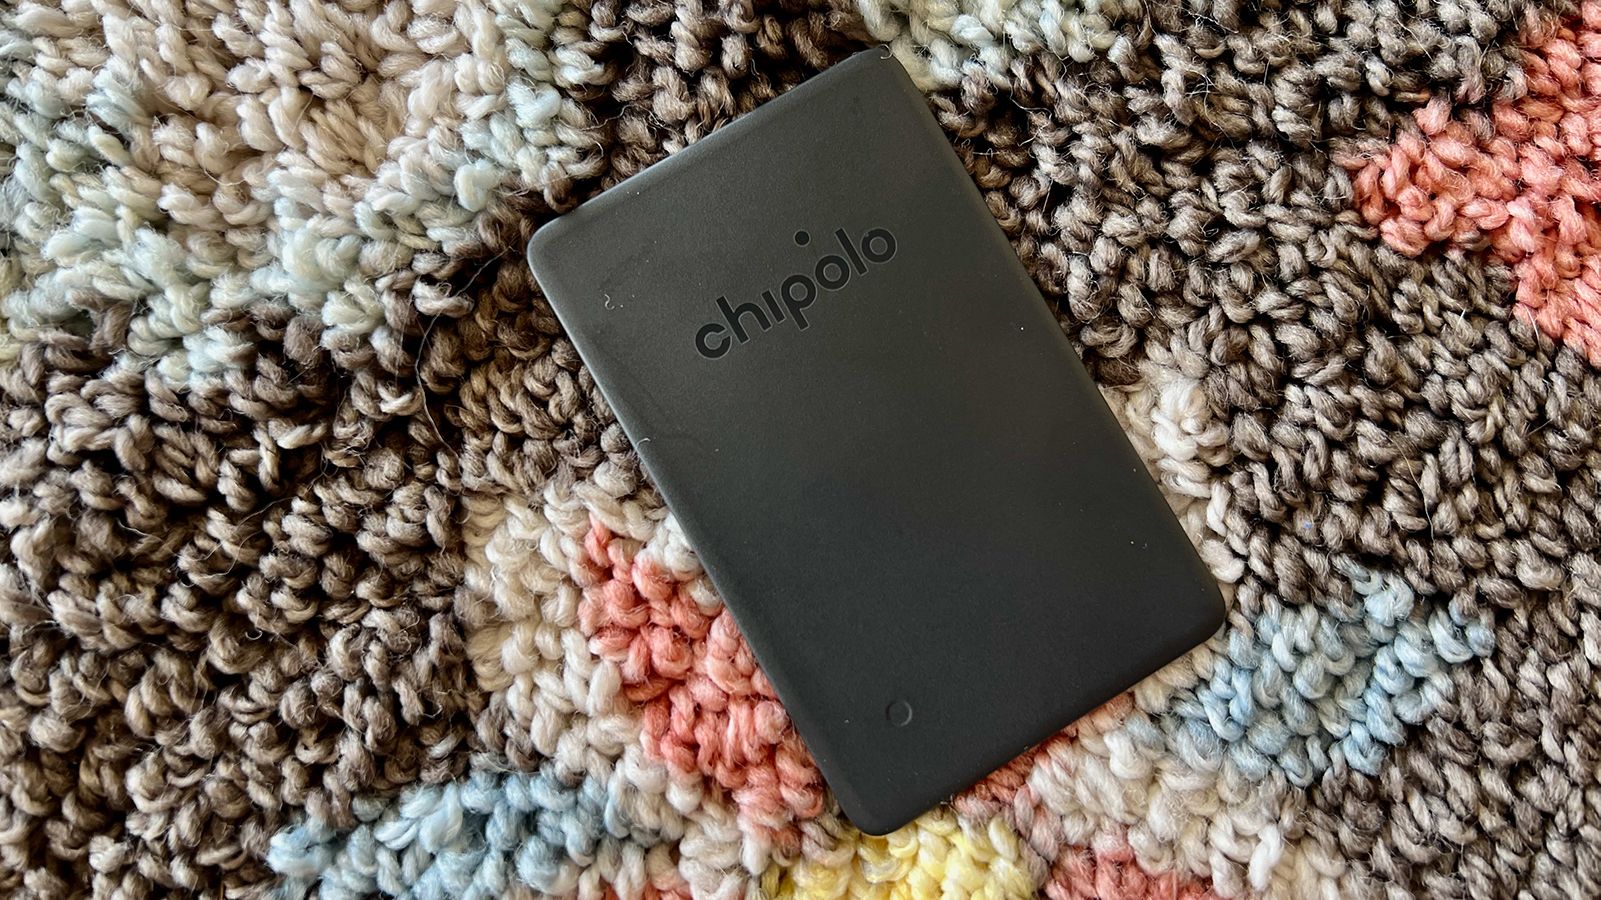 The $35 Chipolo Card Spot is perfect for people who always lose their wallet | CNN Underscored